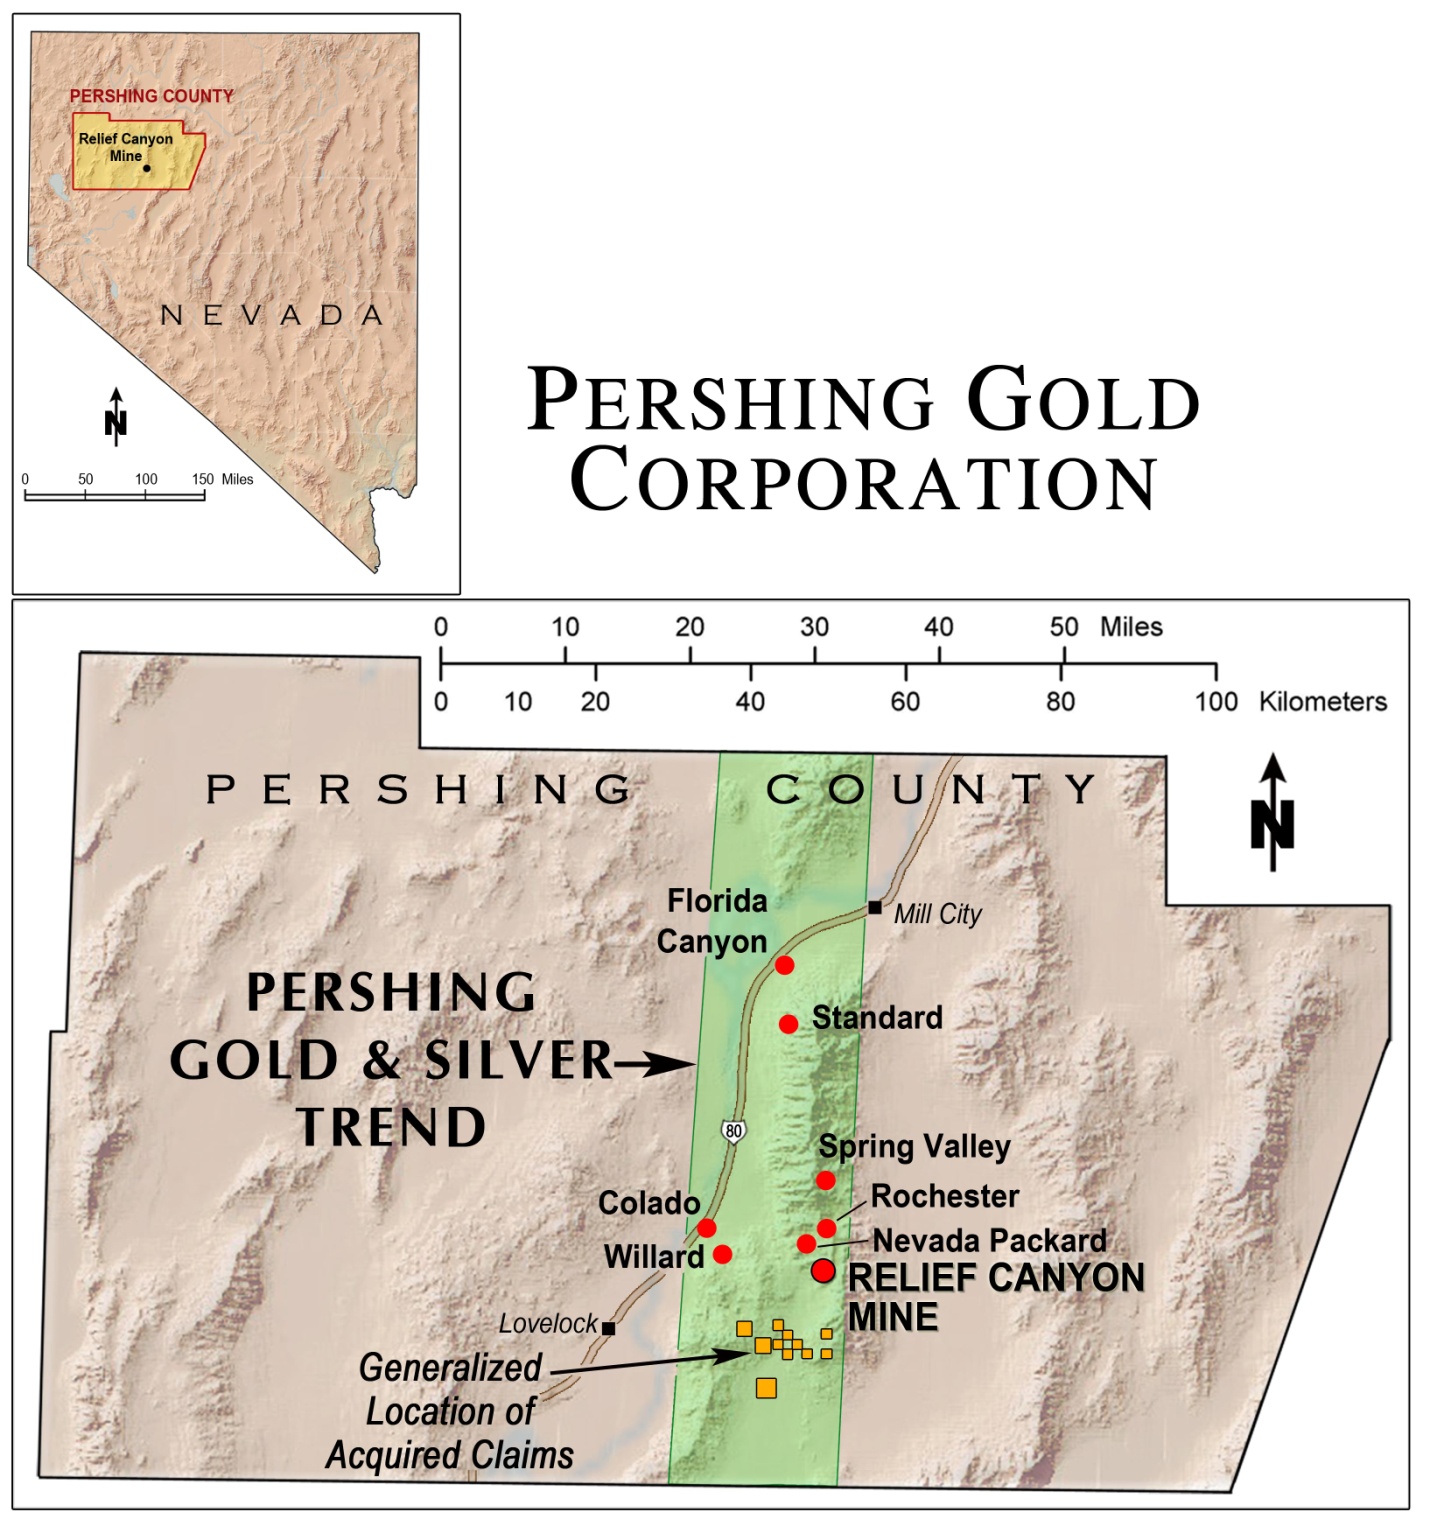 Pershing Gold & Silver Trend